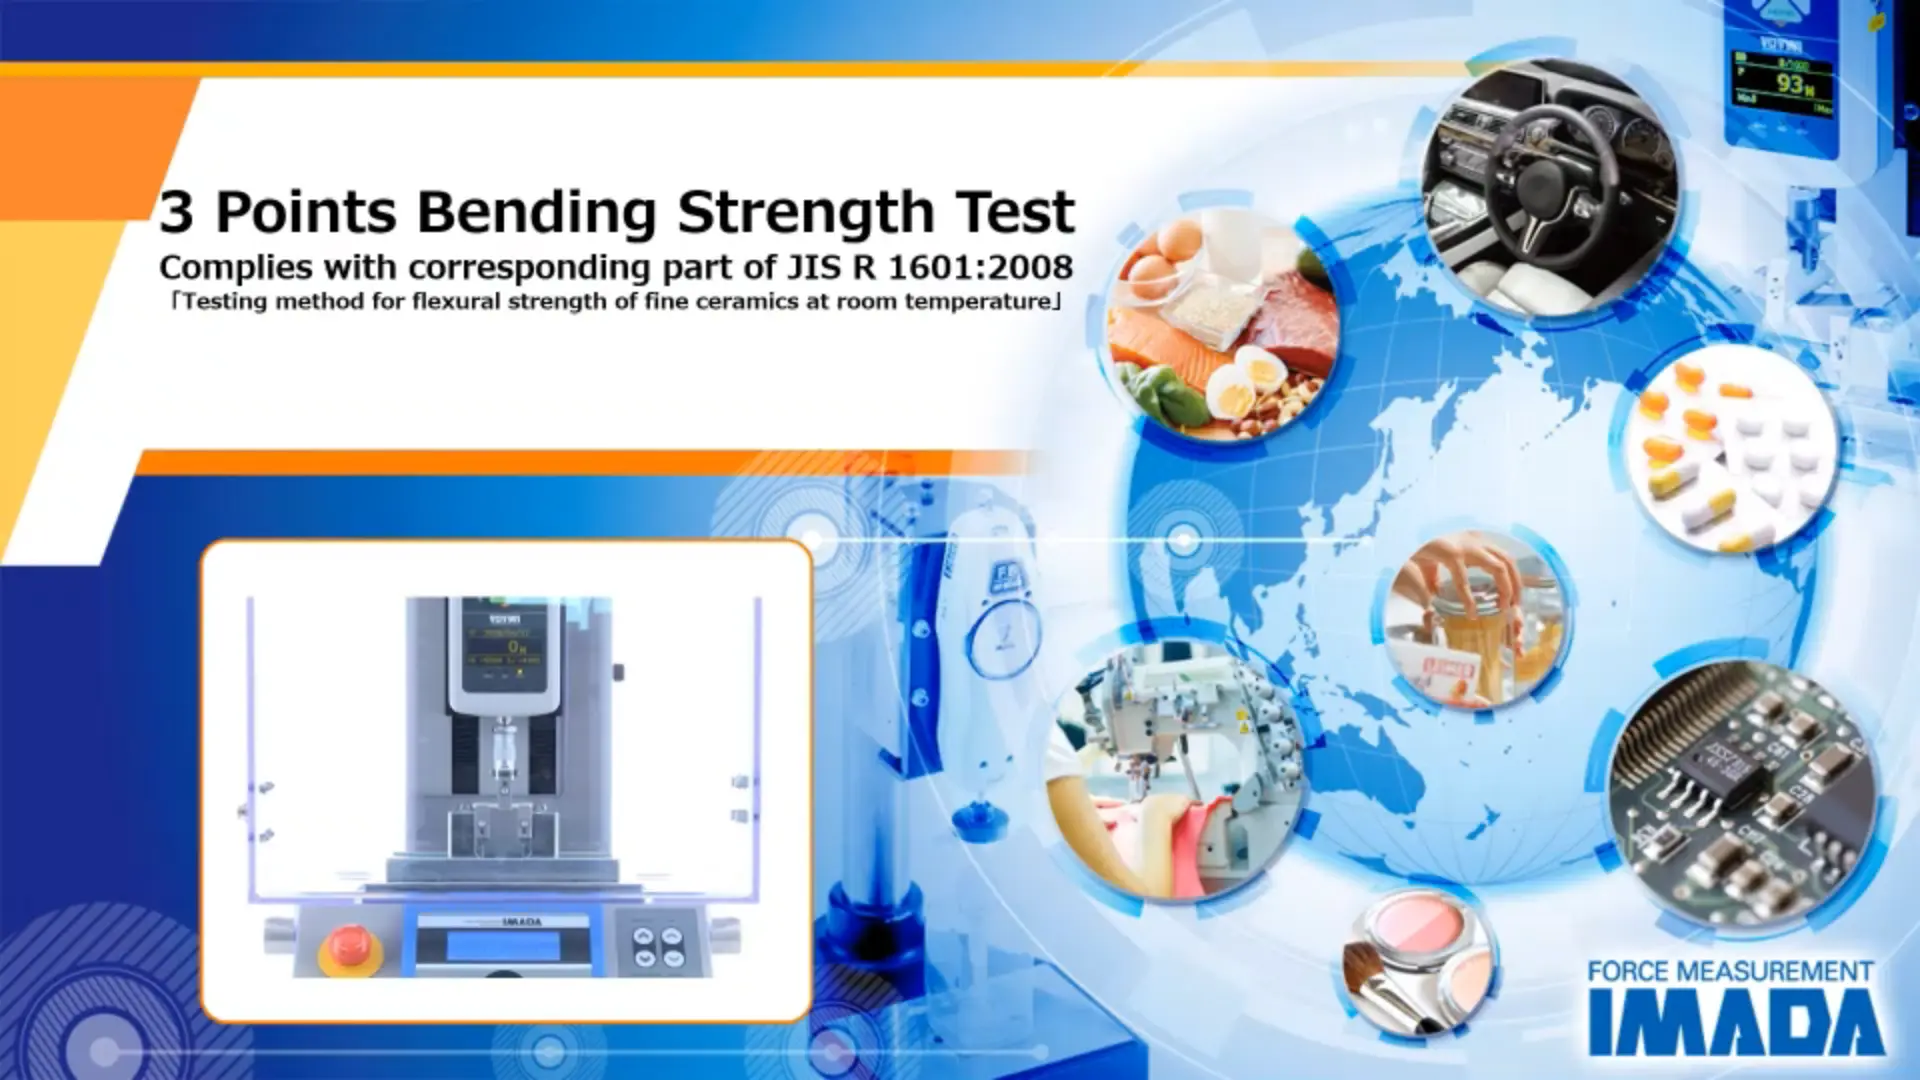 3-Point Bending Strength Test of Fine Ceramics (Complies with the corresponding part of JIS R 1601:2008)